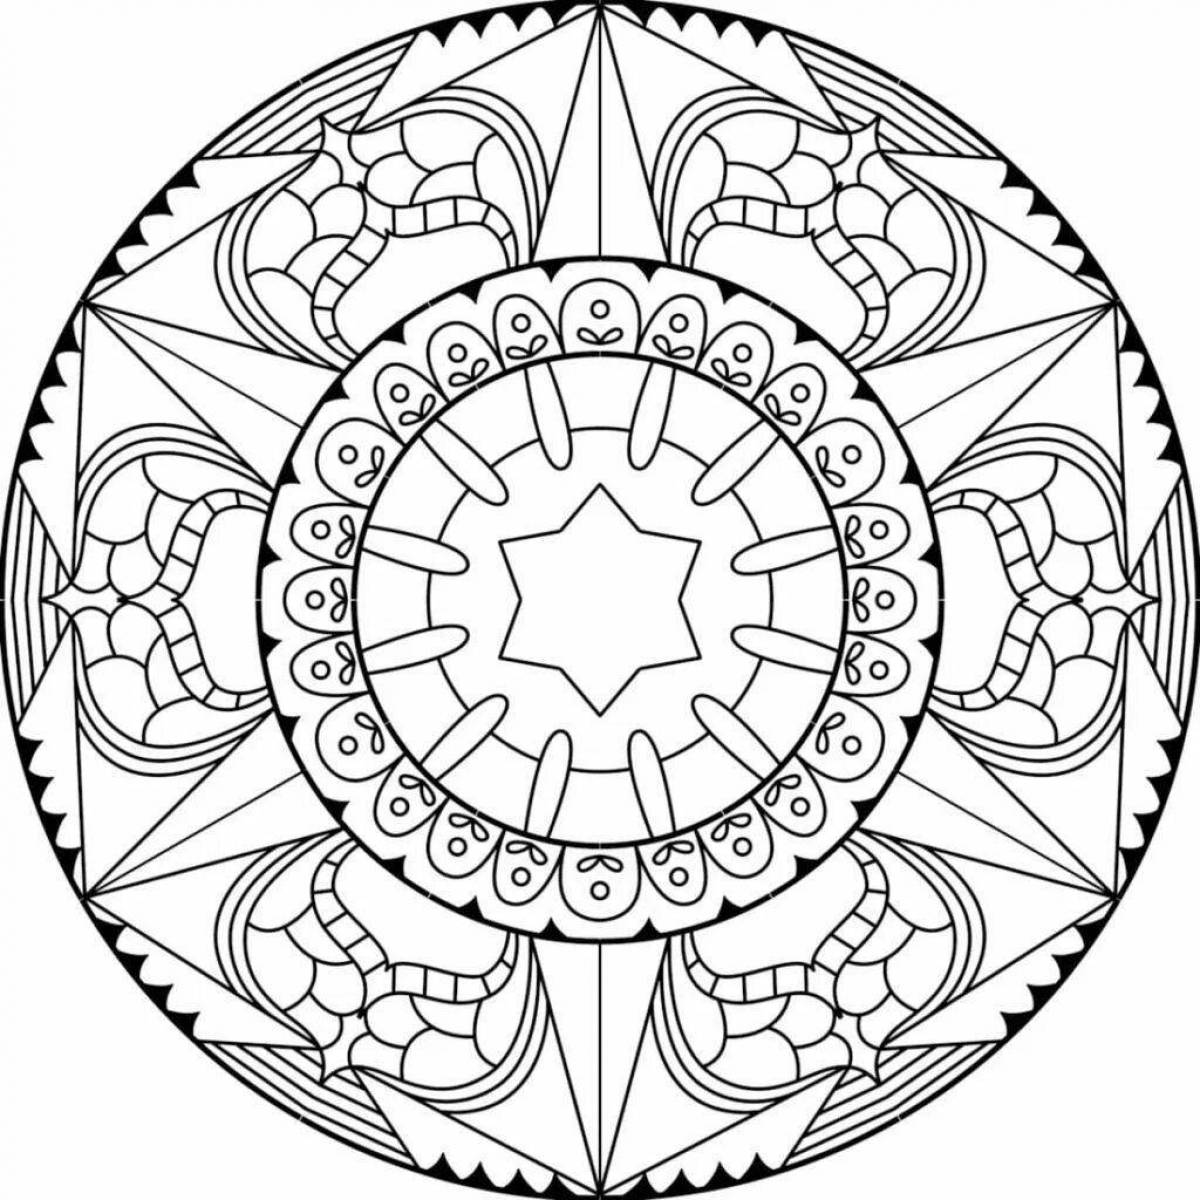 Dazzling coloring mandala for victory and success